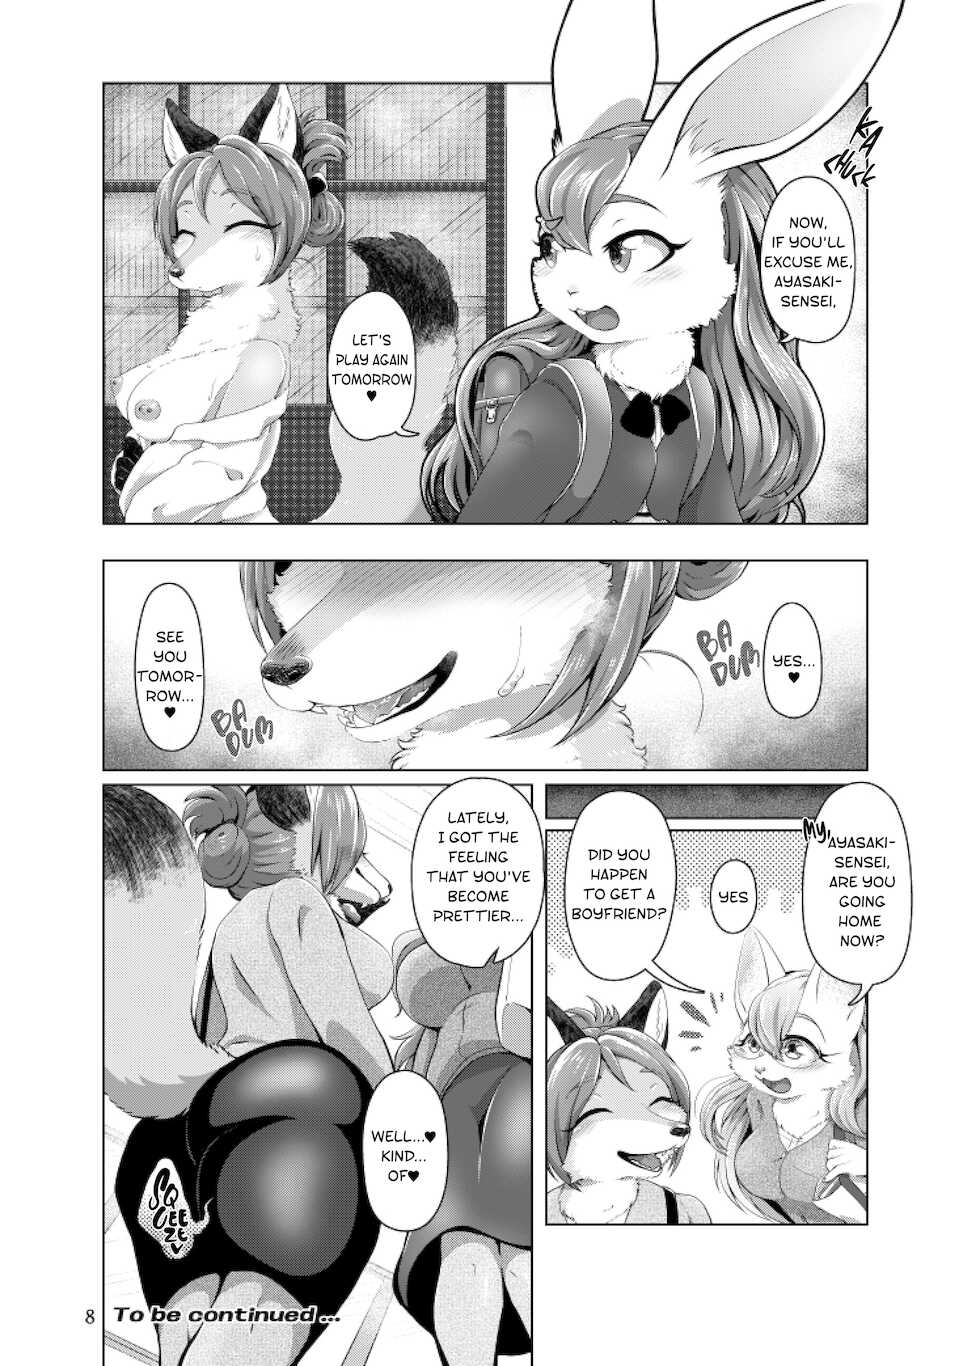 [Harugumo. (Negoya)] Houkago Futari, Itsumo no Basho de | The Two of Them After School, at the Usual Place [English] [EHCOVE] [Digital] - Page 8